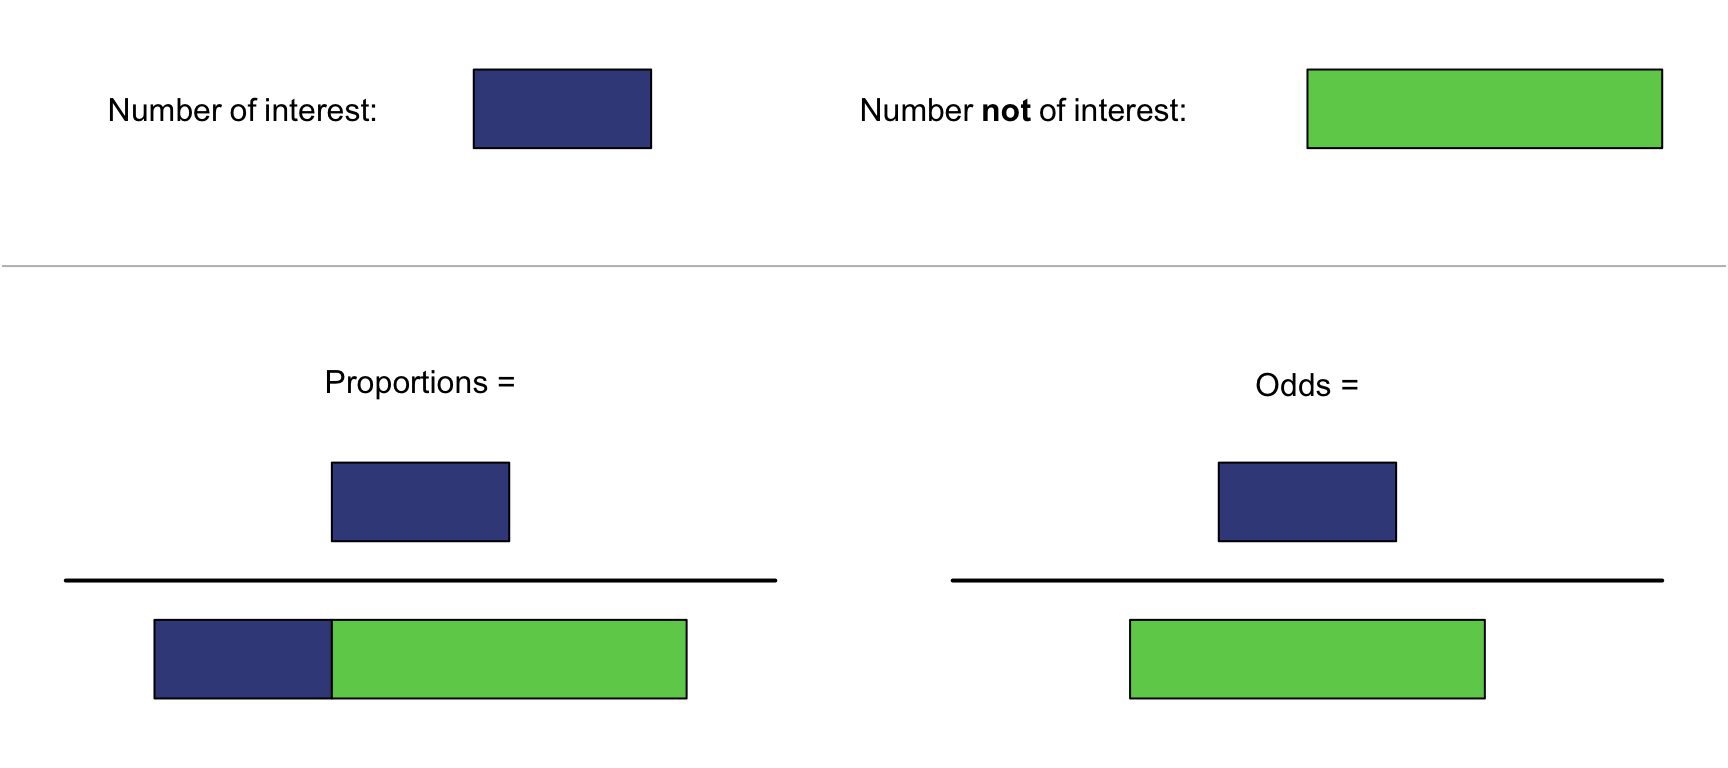 Proportions (left) are the number of interest divided by the total number; odds (right) are the number of interest divided by the rest.